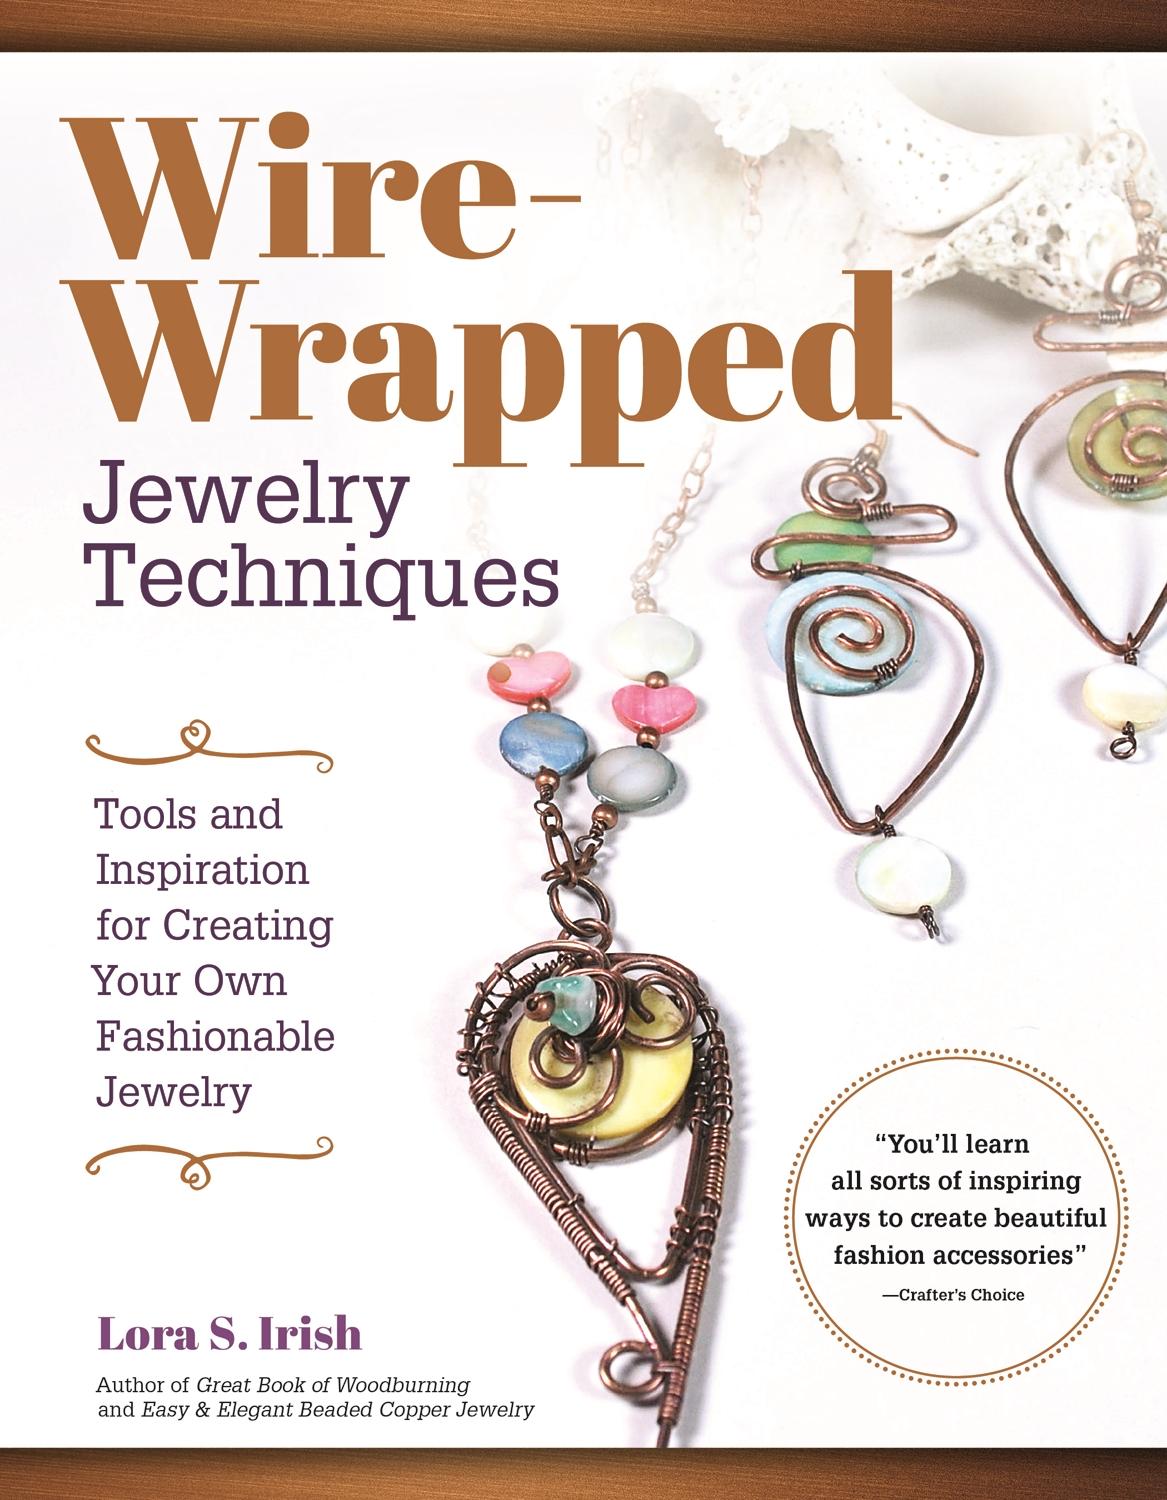 The Ultimate Guide to Resin Jewelry Making: Techniques, Tips and Ideas on  How to Make Resin Jewelry (Paperback)